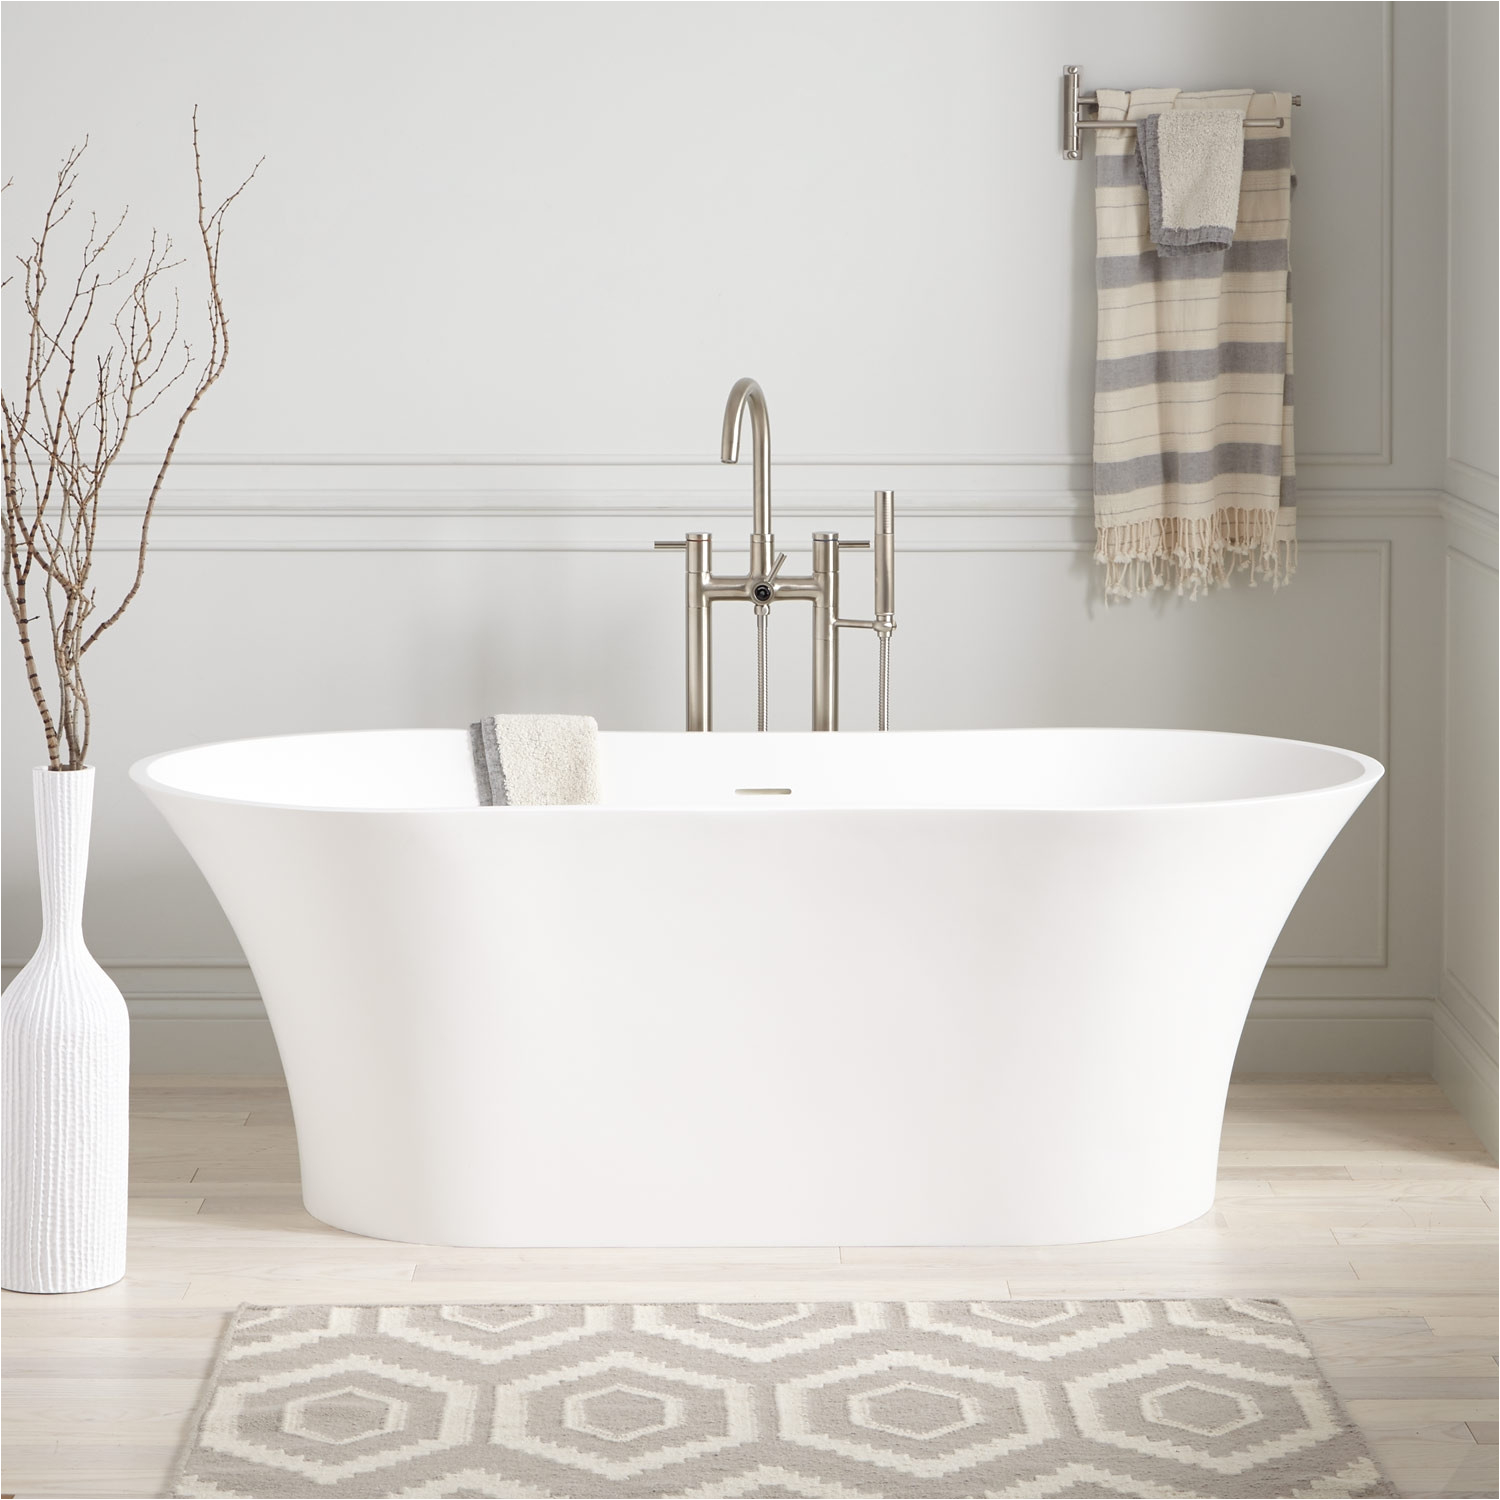 64 neva freestanding resin tub with overflow includes drain white matte finish